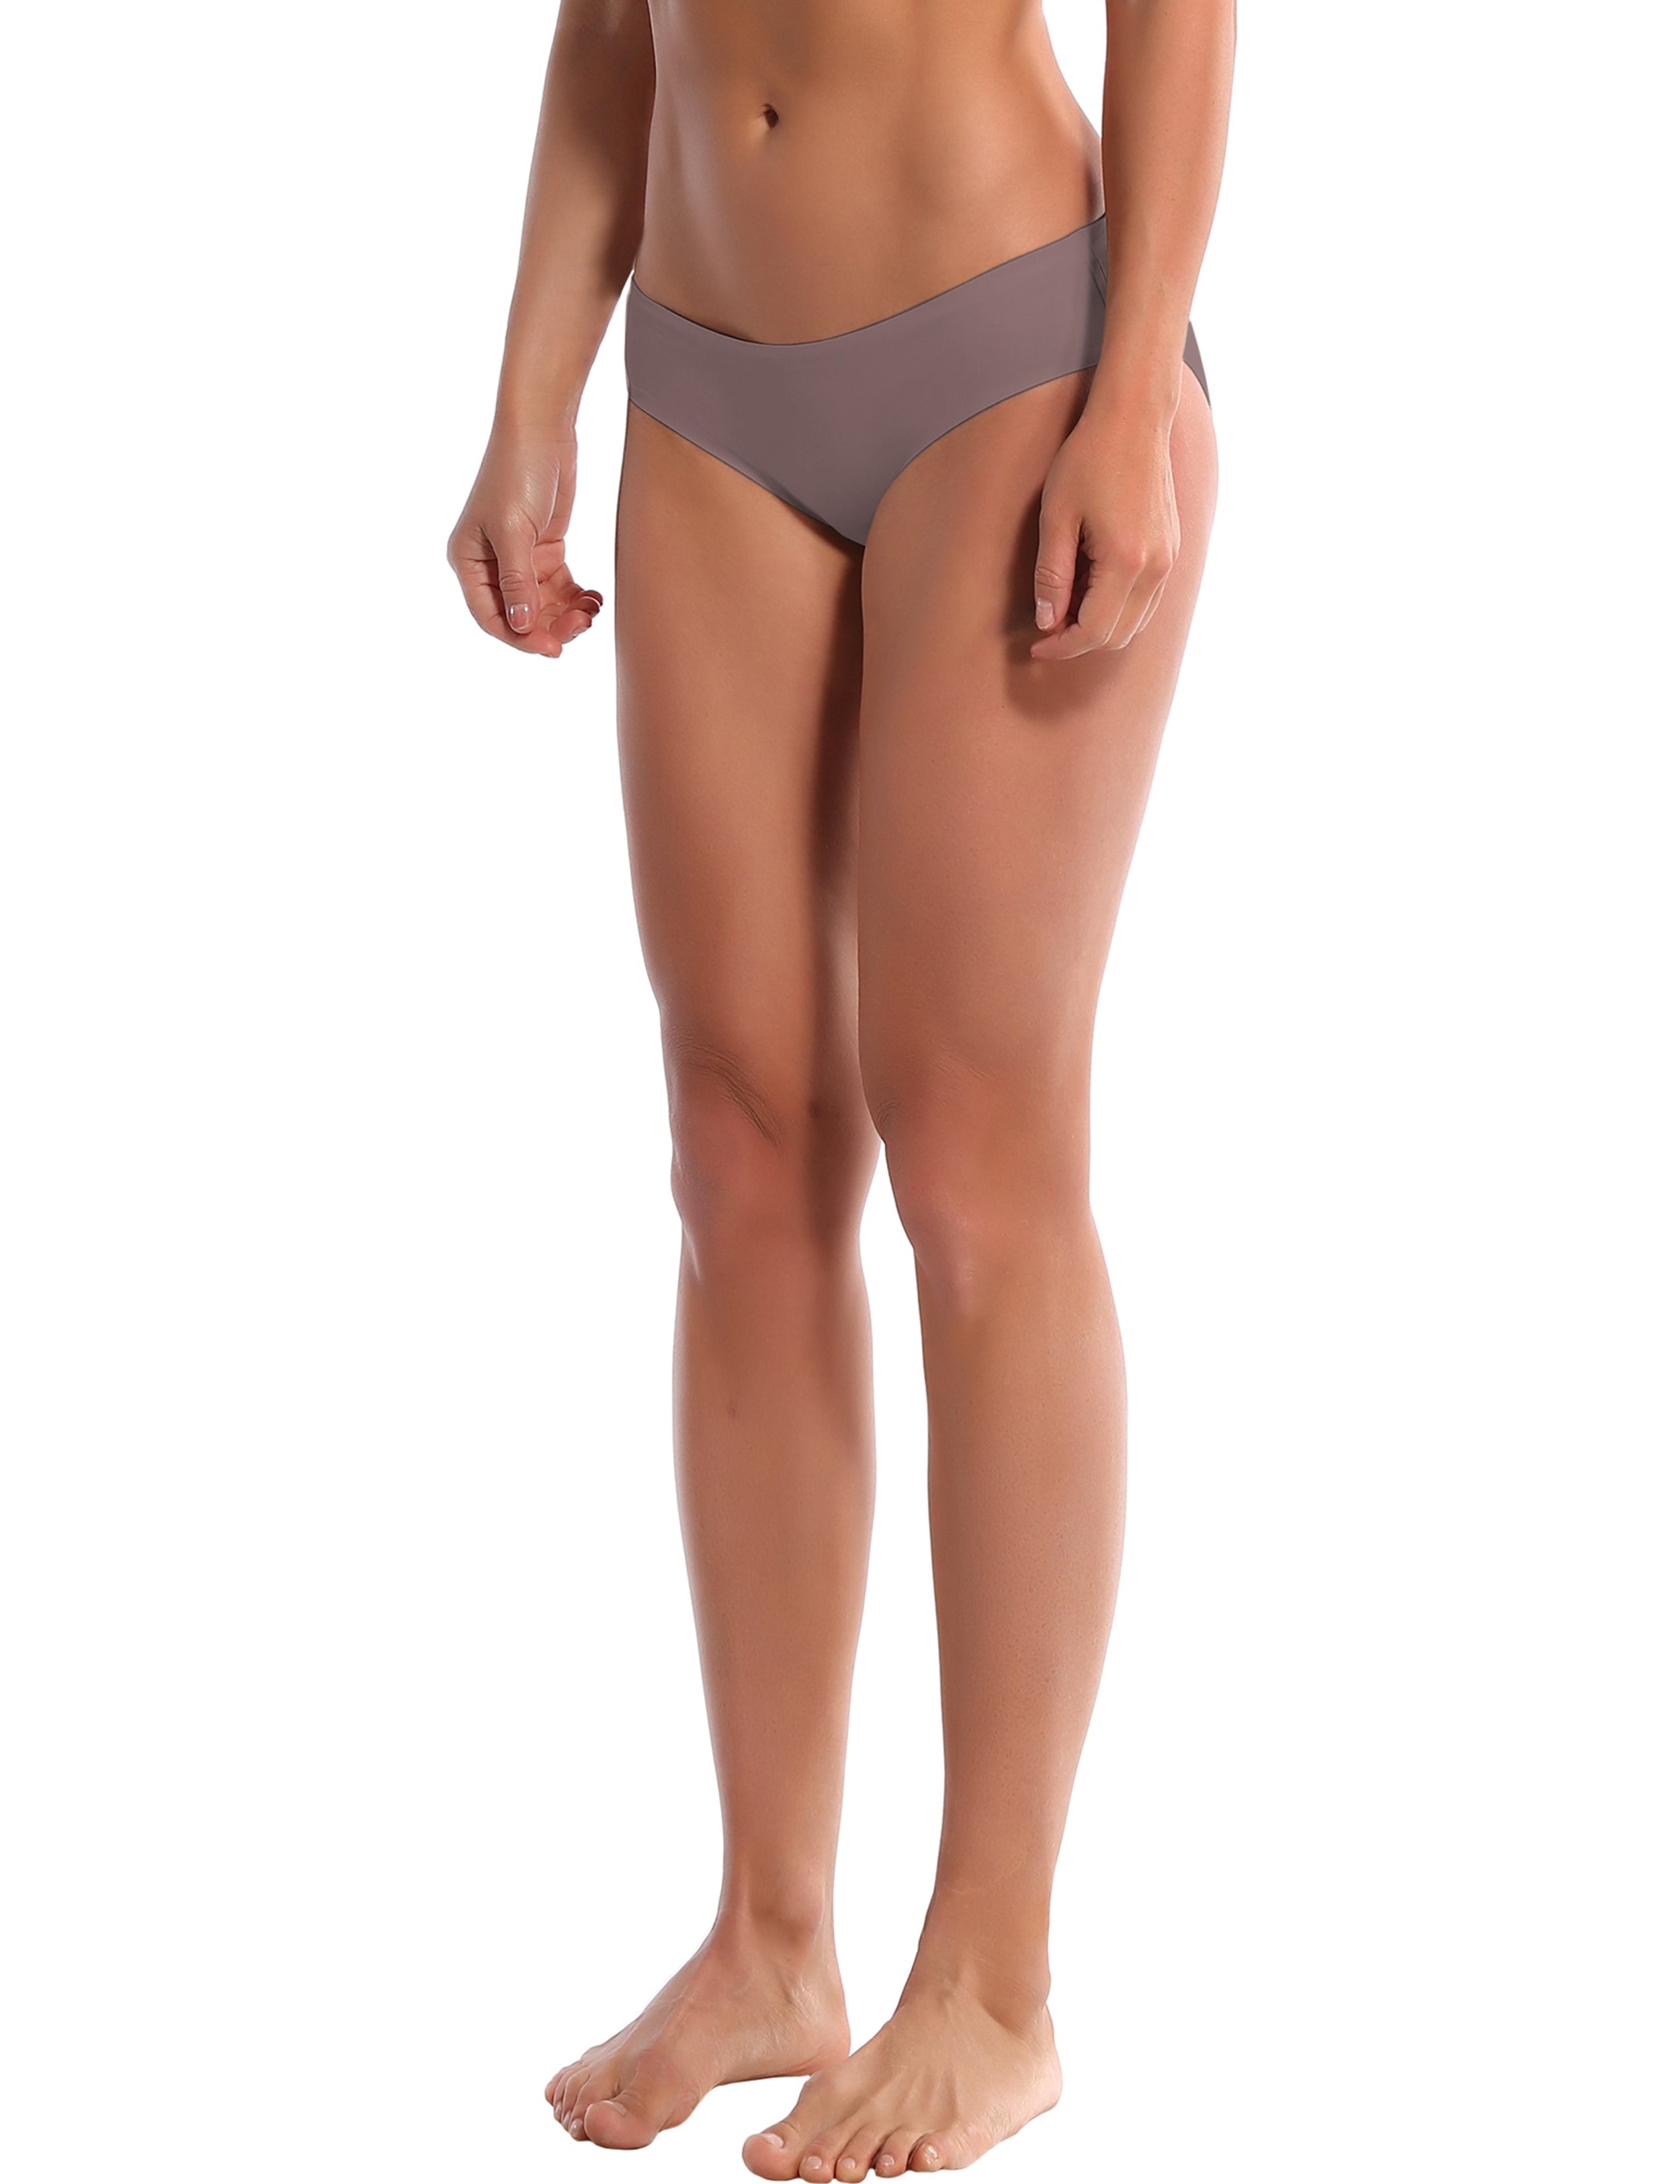 Invisibles Sport Bikini Panties brown Sleek, soft, smooth and totally comfortable: our newest bikini style is here. High elasticity High density Softest-ever fabric Laser cutting Unsealed Comfortable No panty lines Machine wash 95% Nylon, 5% Spandex